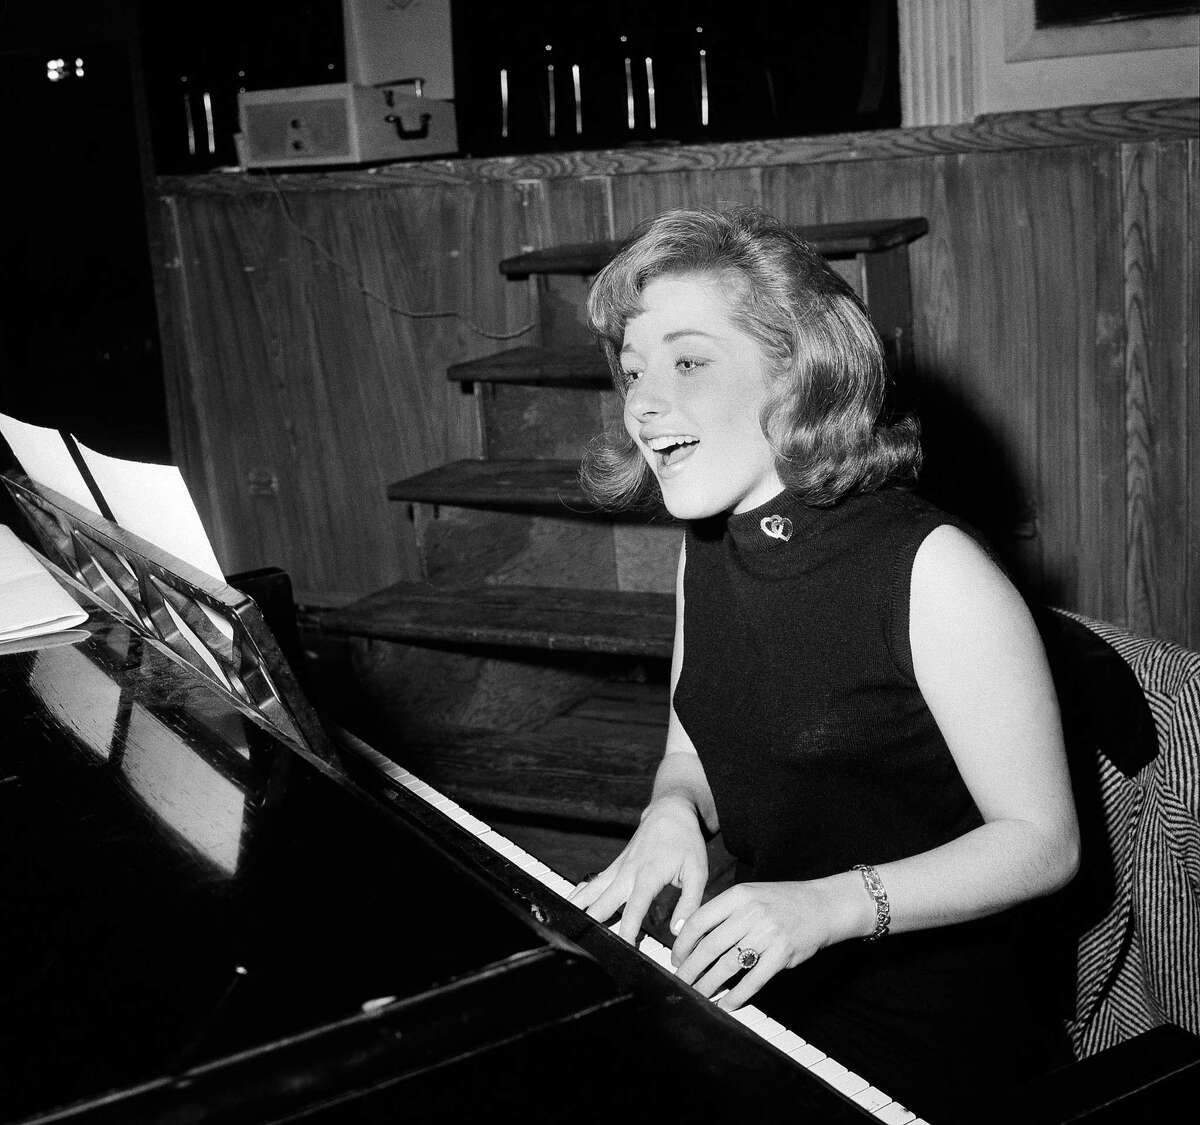 In this Jan. 5, 1966 file photo, singer Lesley Gore rehearses at a piano, in New York.